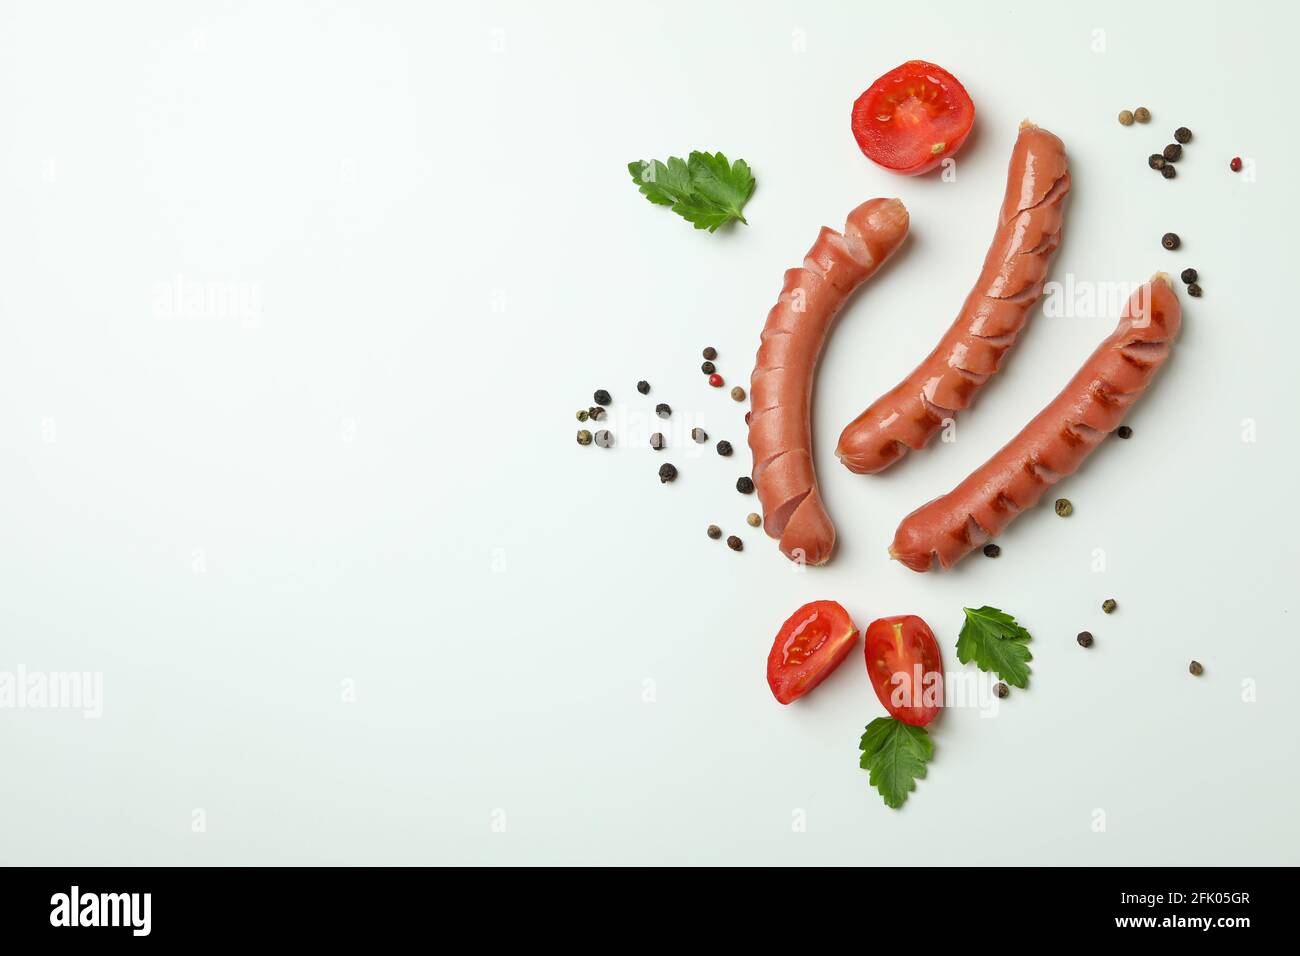 Grilled sausage and spices on white background Stock Photo